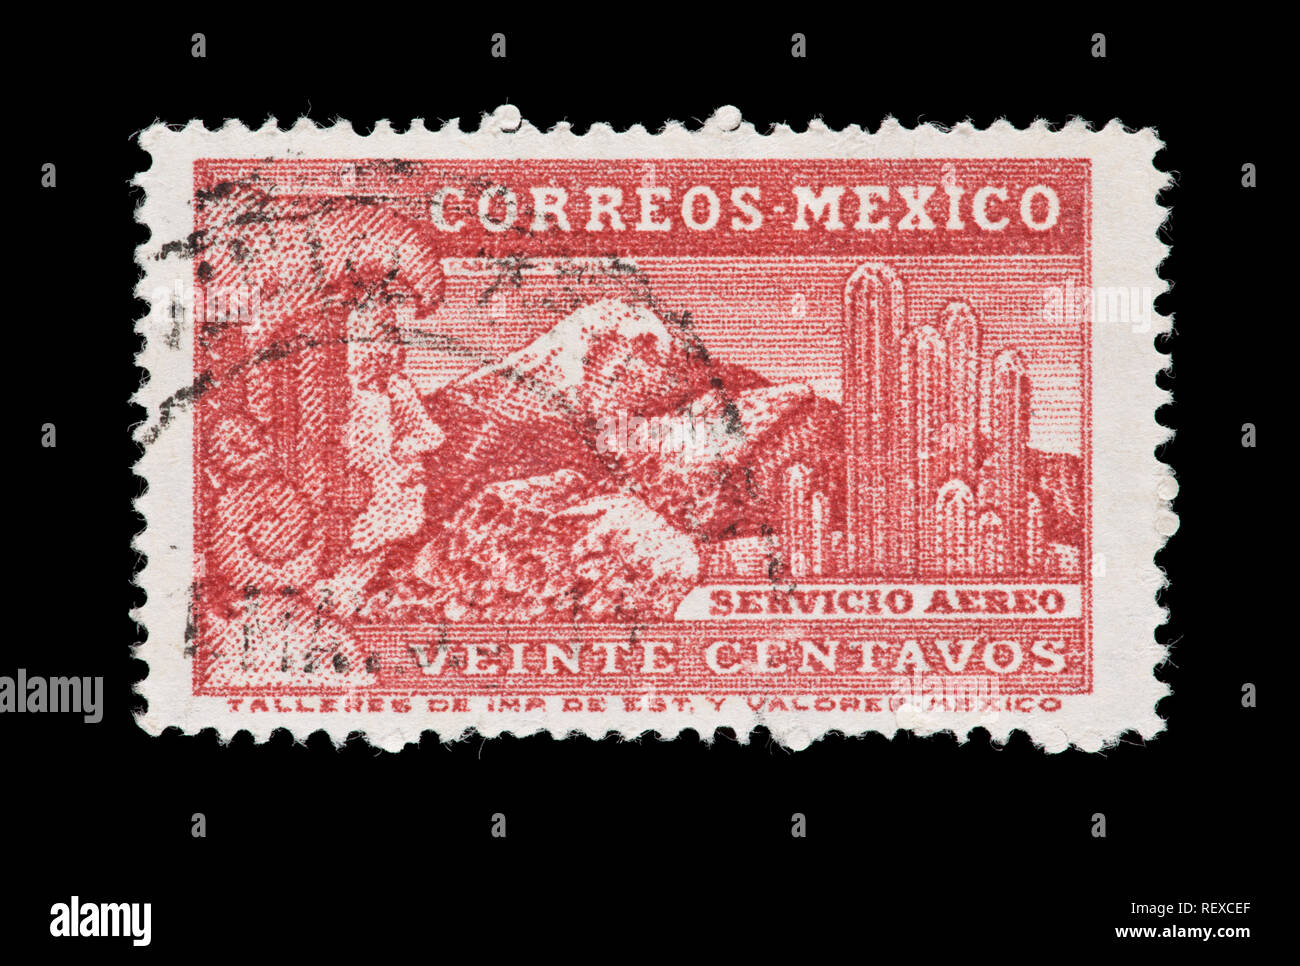 Postage stamp from Mexico depicting Eagle Man, desert and cacti. Stock Photo